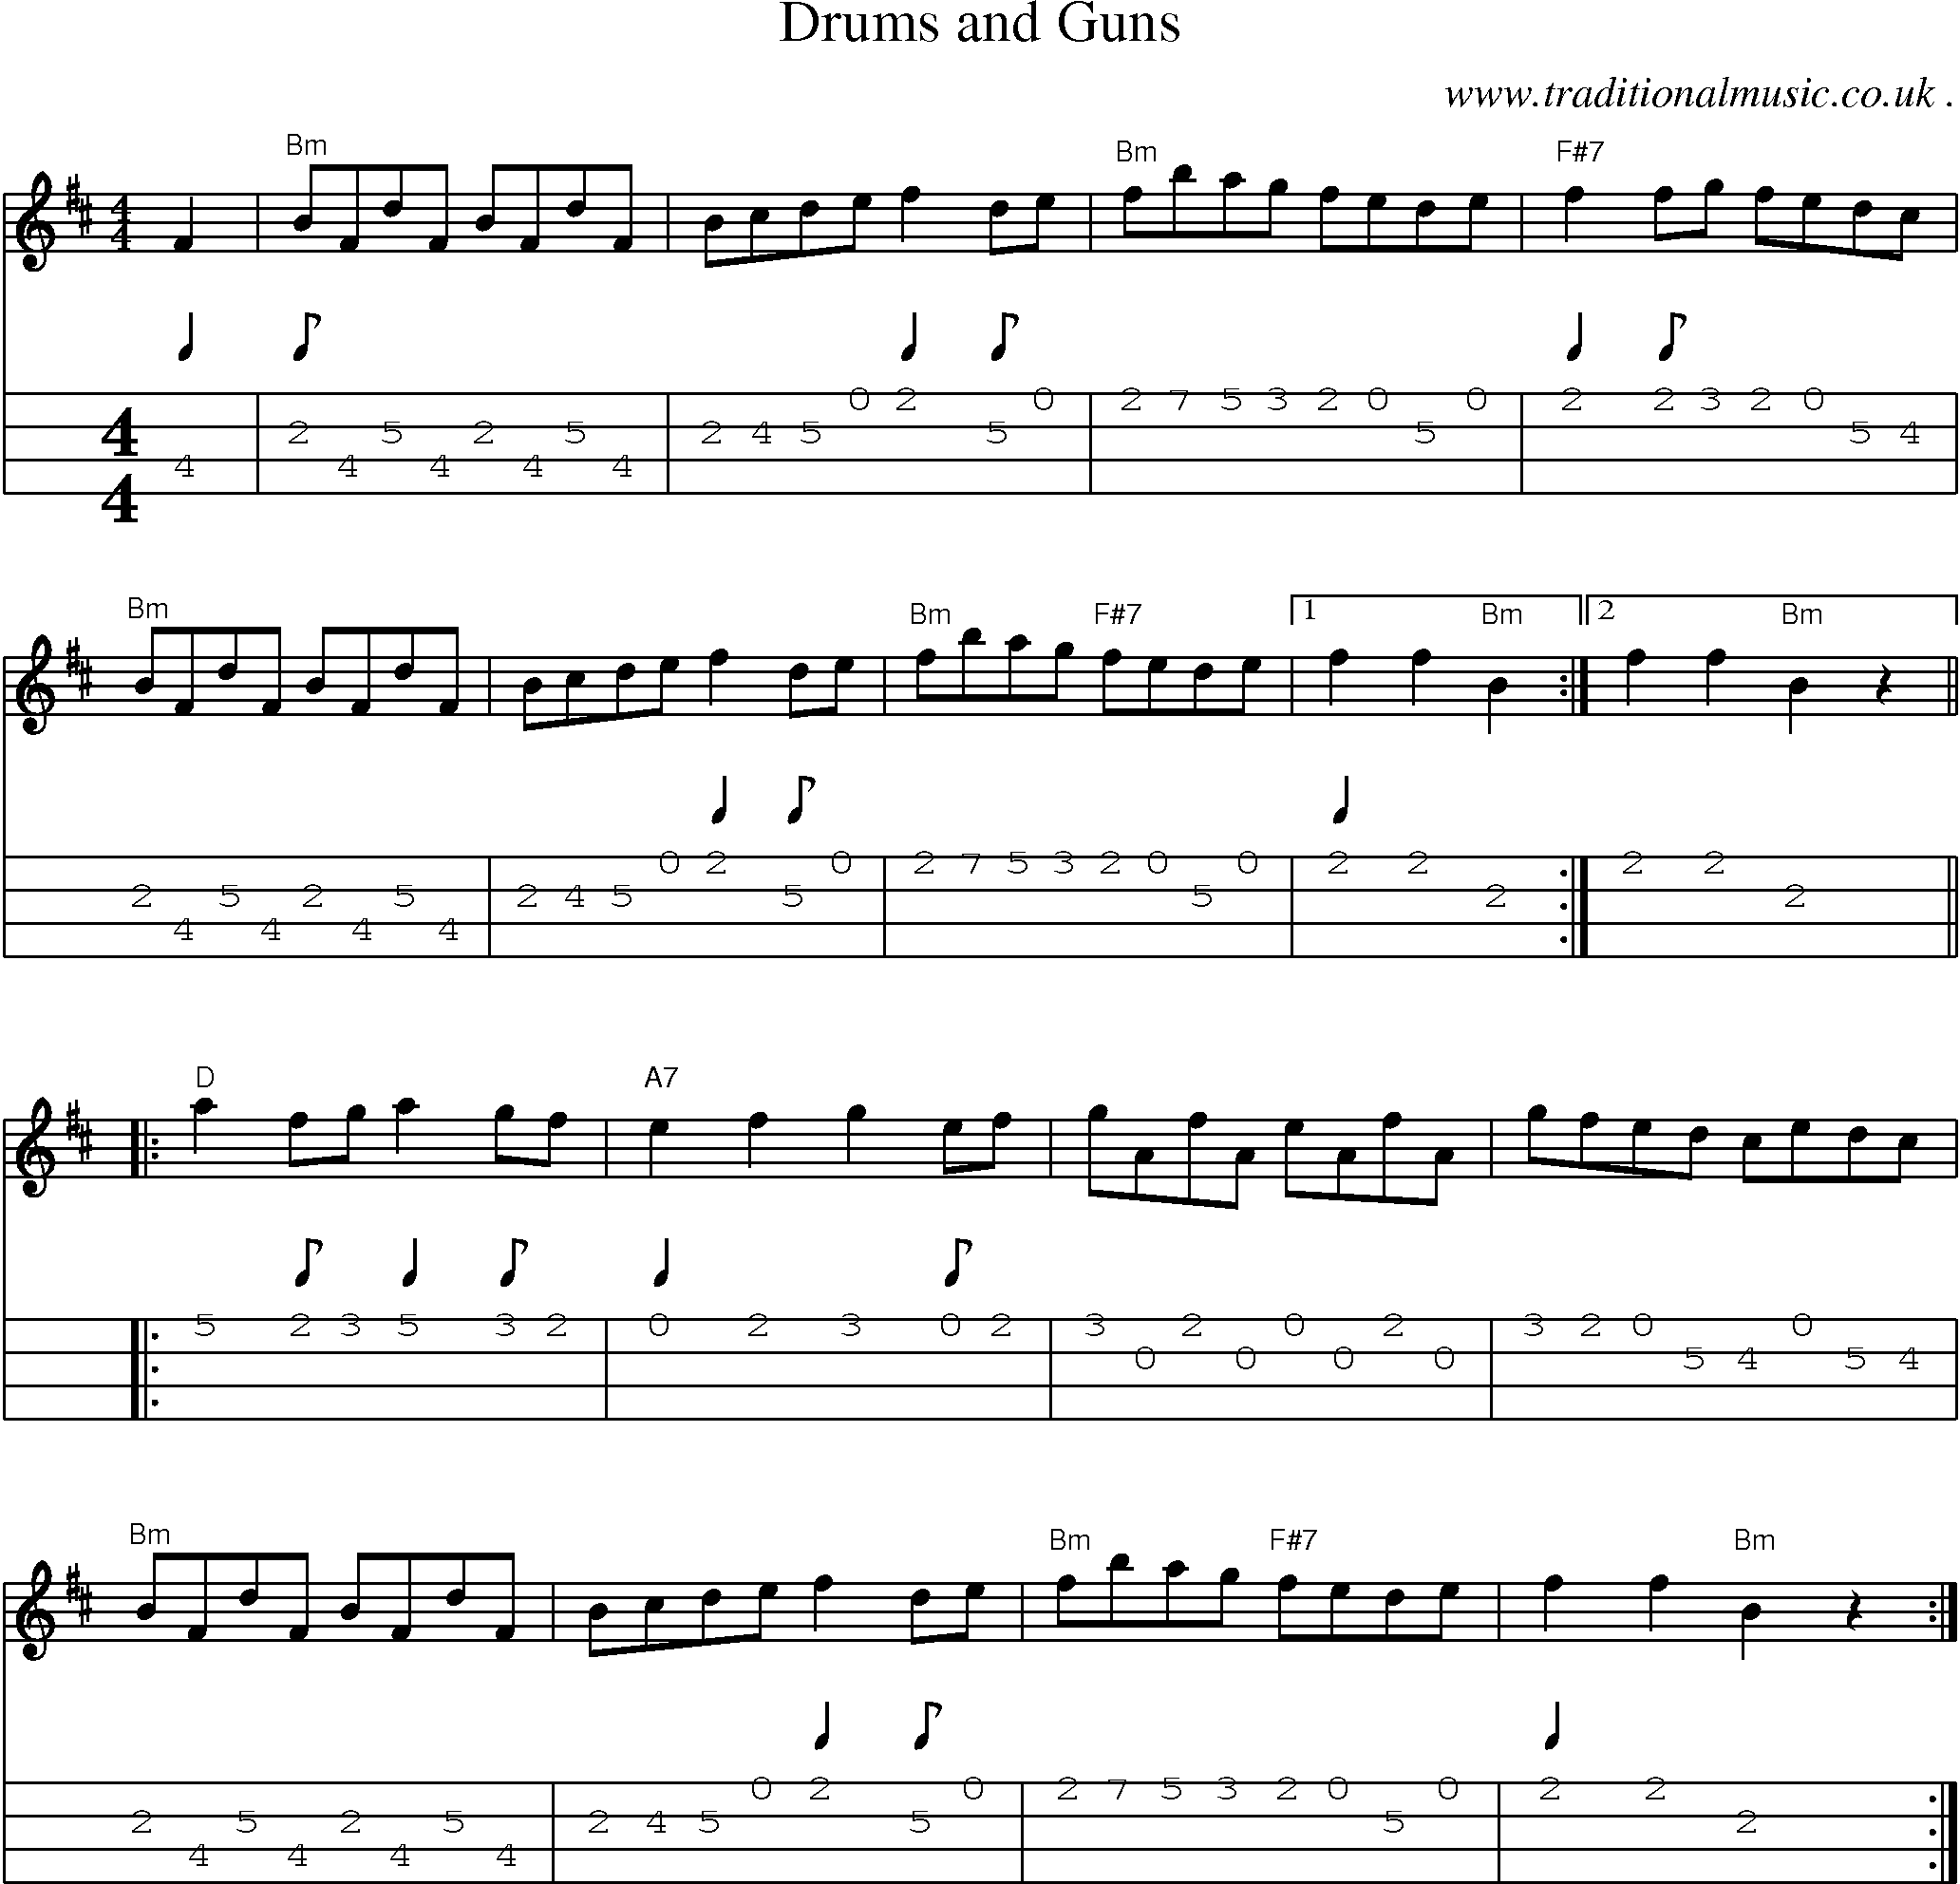 Music Score and Guitar Tabs for Drums And Guns